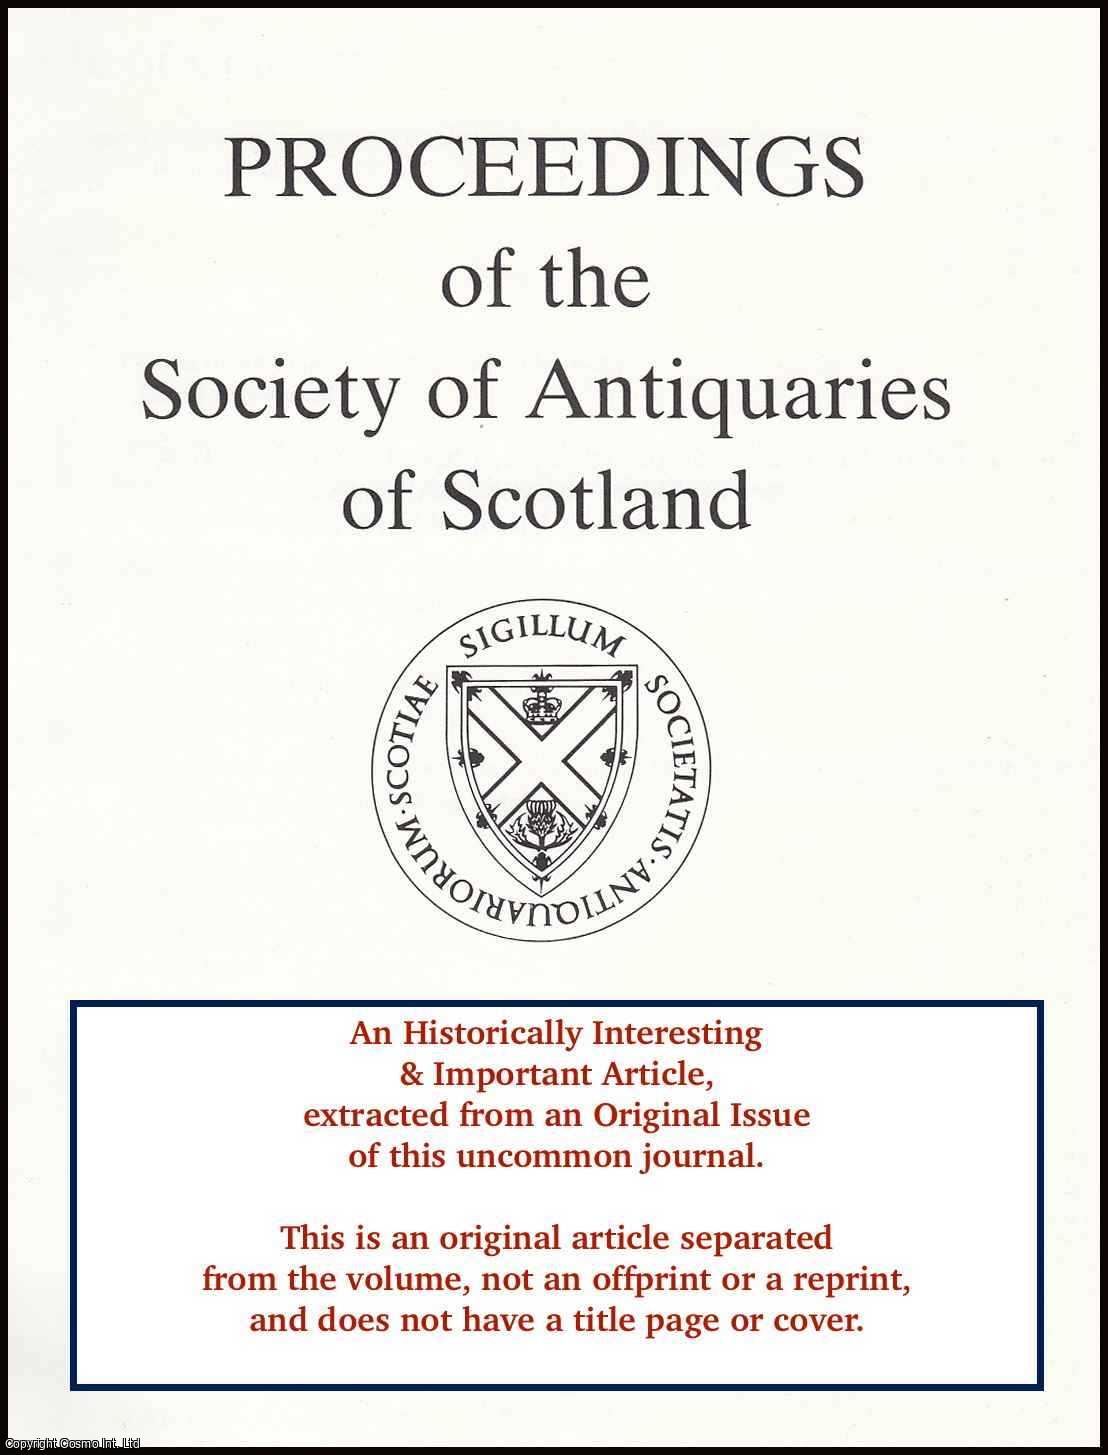 Leslie Alcock & Elizabeth A. Alcock - 1992. Reconnaissance Excavations on Early Historic Fortifications and Other Royal Sites in Scotland, 1974-84; 5: A, Excavations & Other Fieldwork at Forteviot, Perthshire, 1981; B, Excavations at Urquhart Castle, Inverness-Shire, 1983; C, Excavations at Dunnottar, Kincardineshire, 1984. An original article from the Proceedings of the Society of Antiquaries of Scotland, 1992.